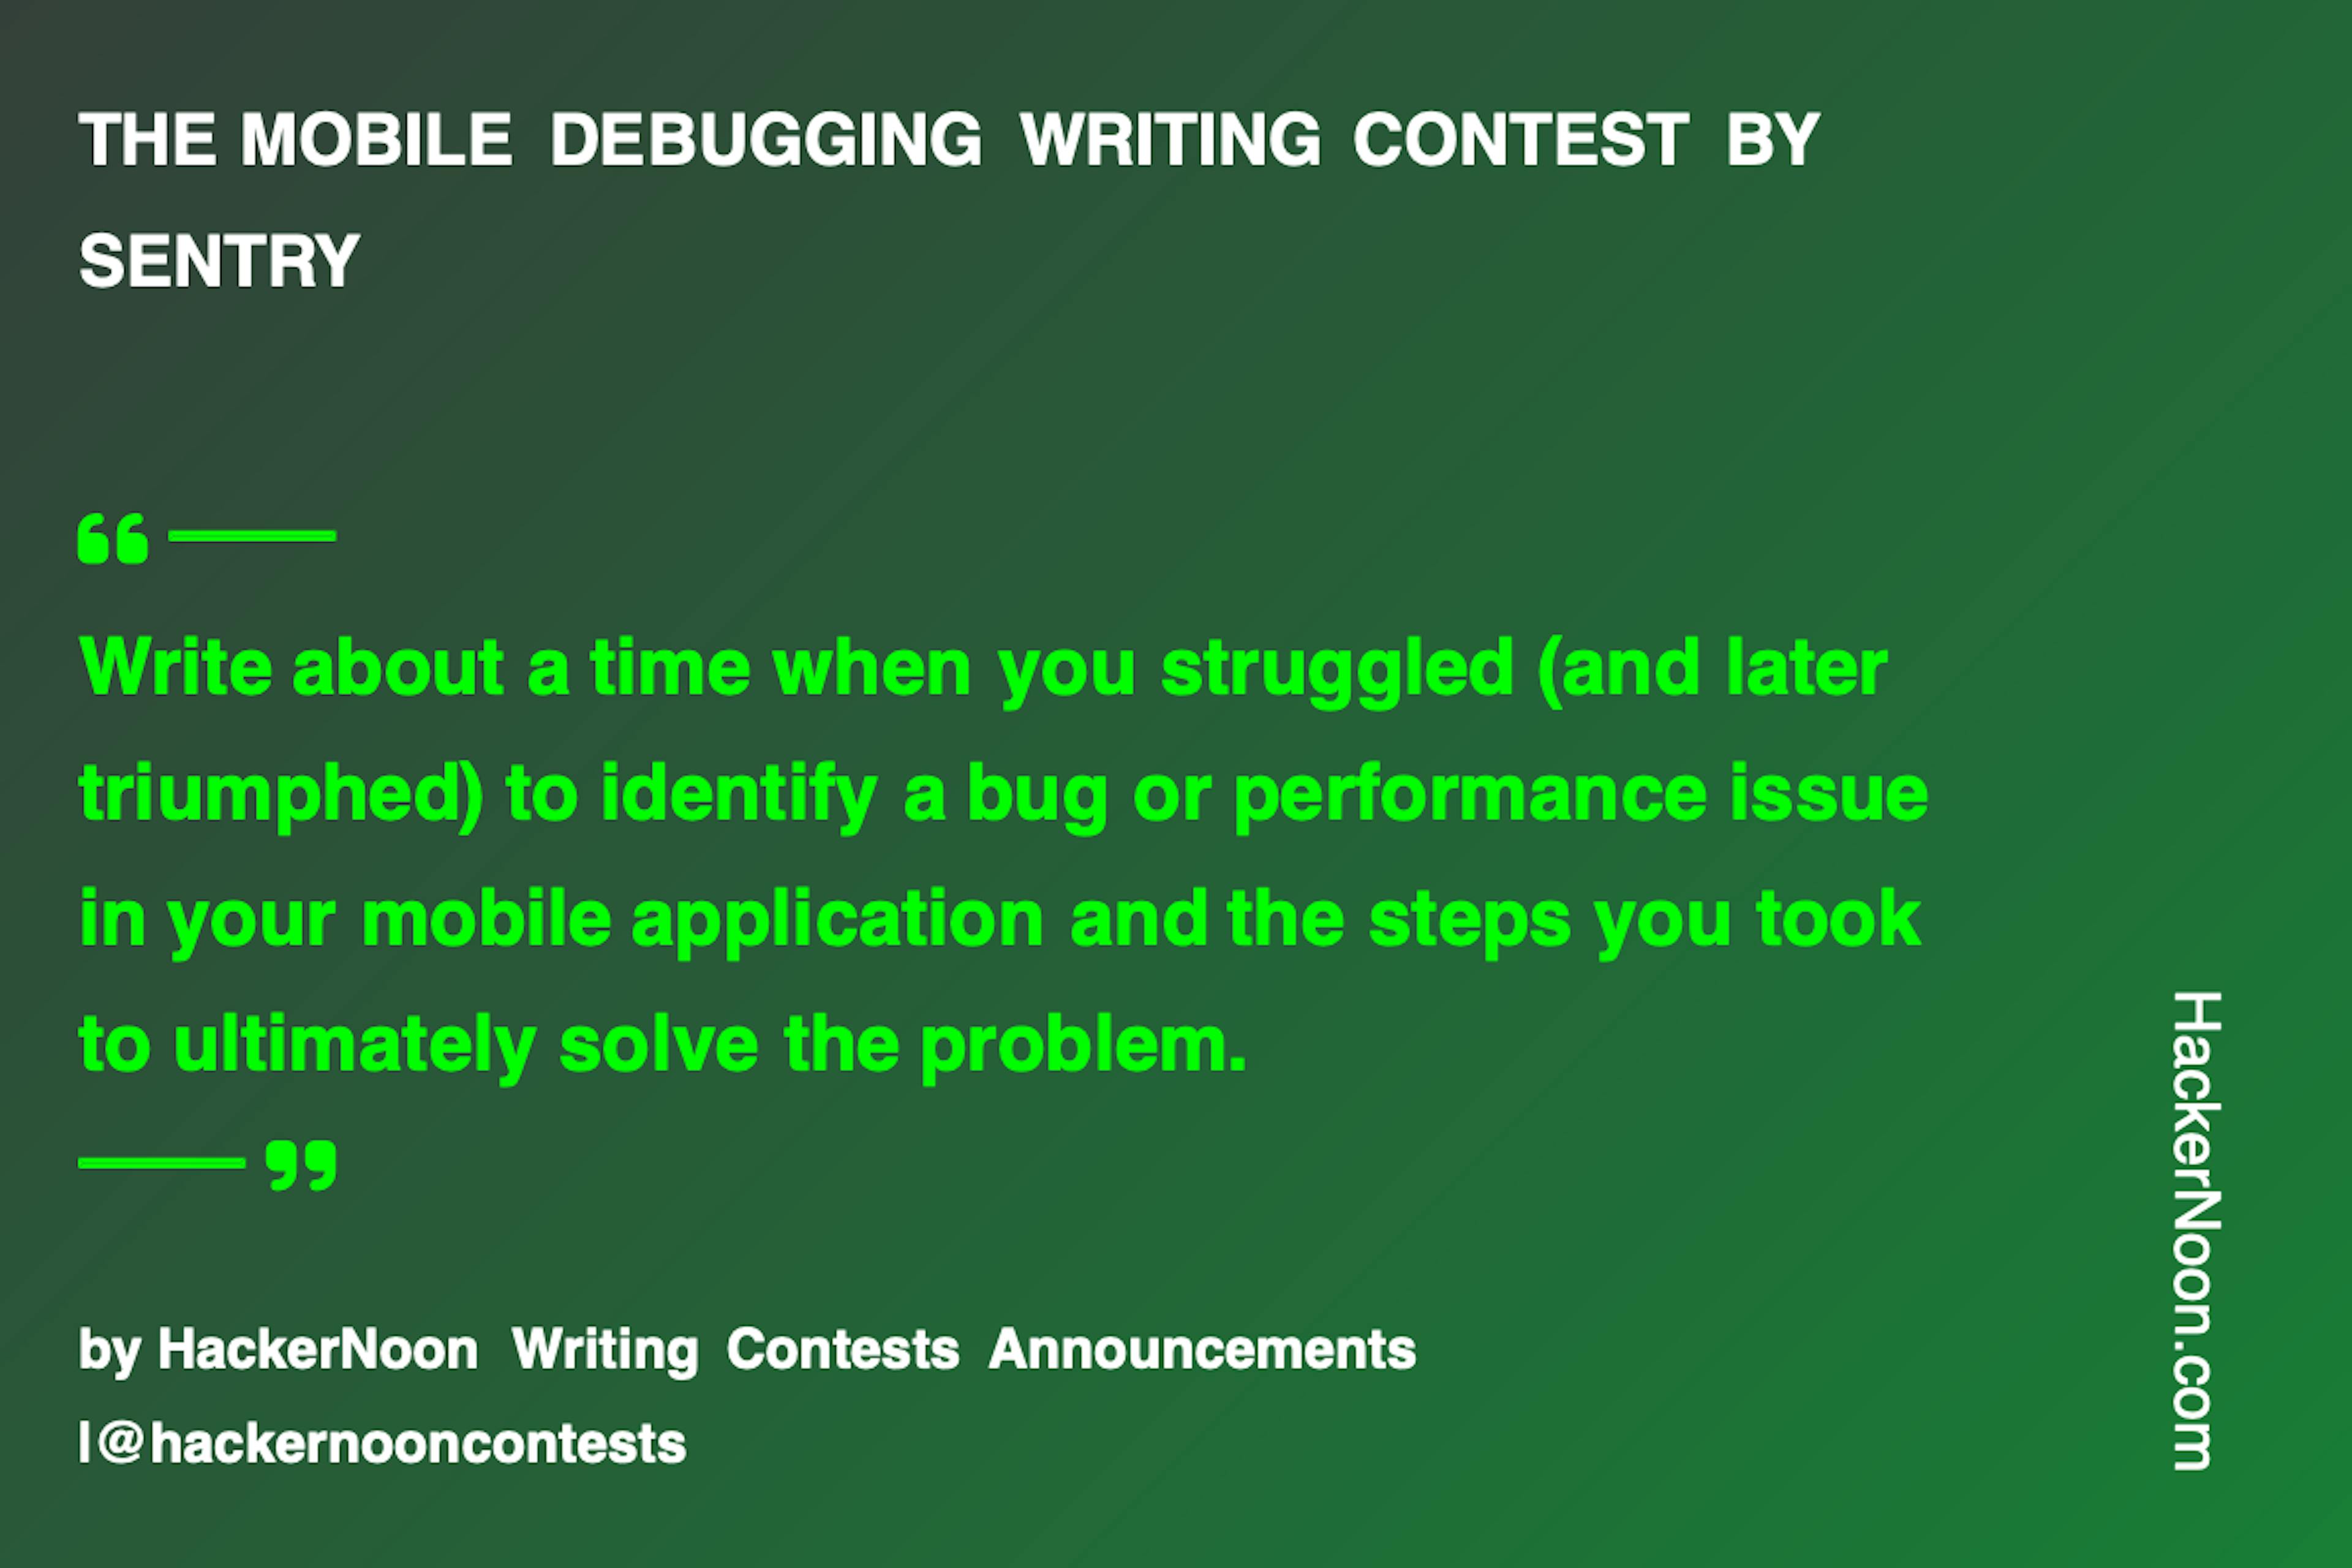 Enter the Mobile Debugging Writing Contest Today!